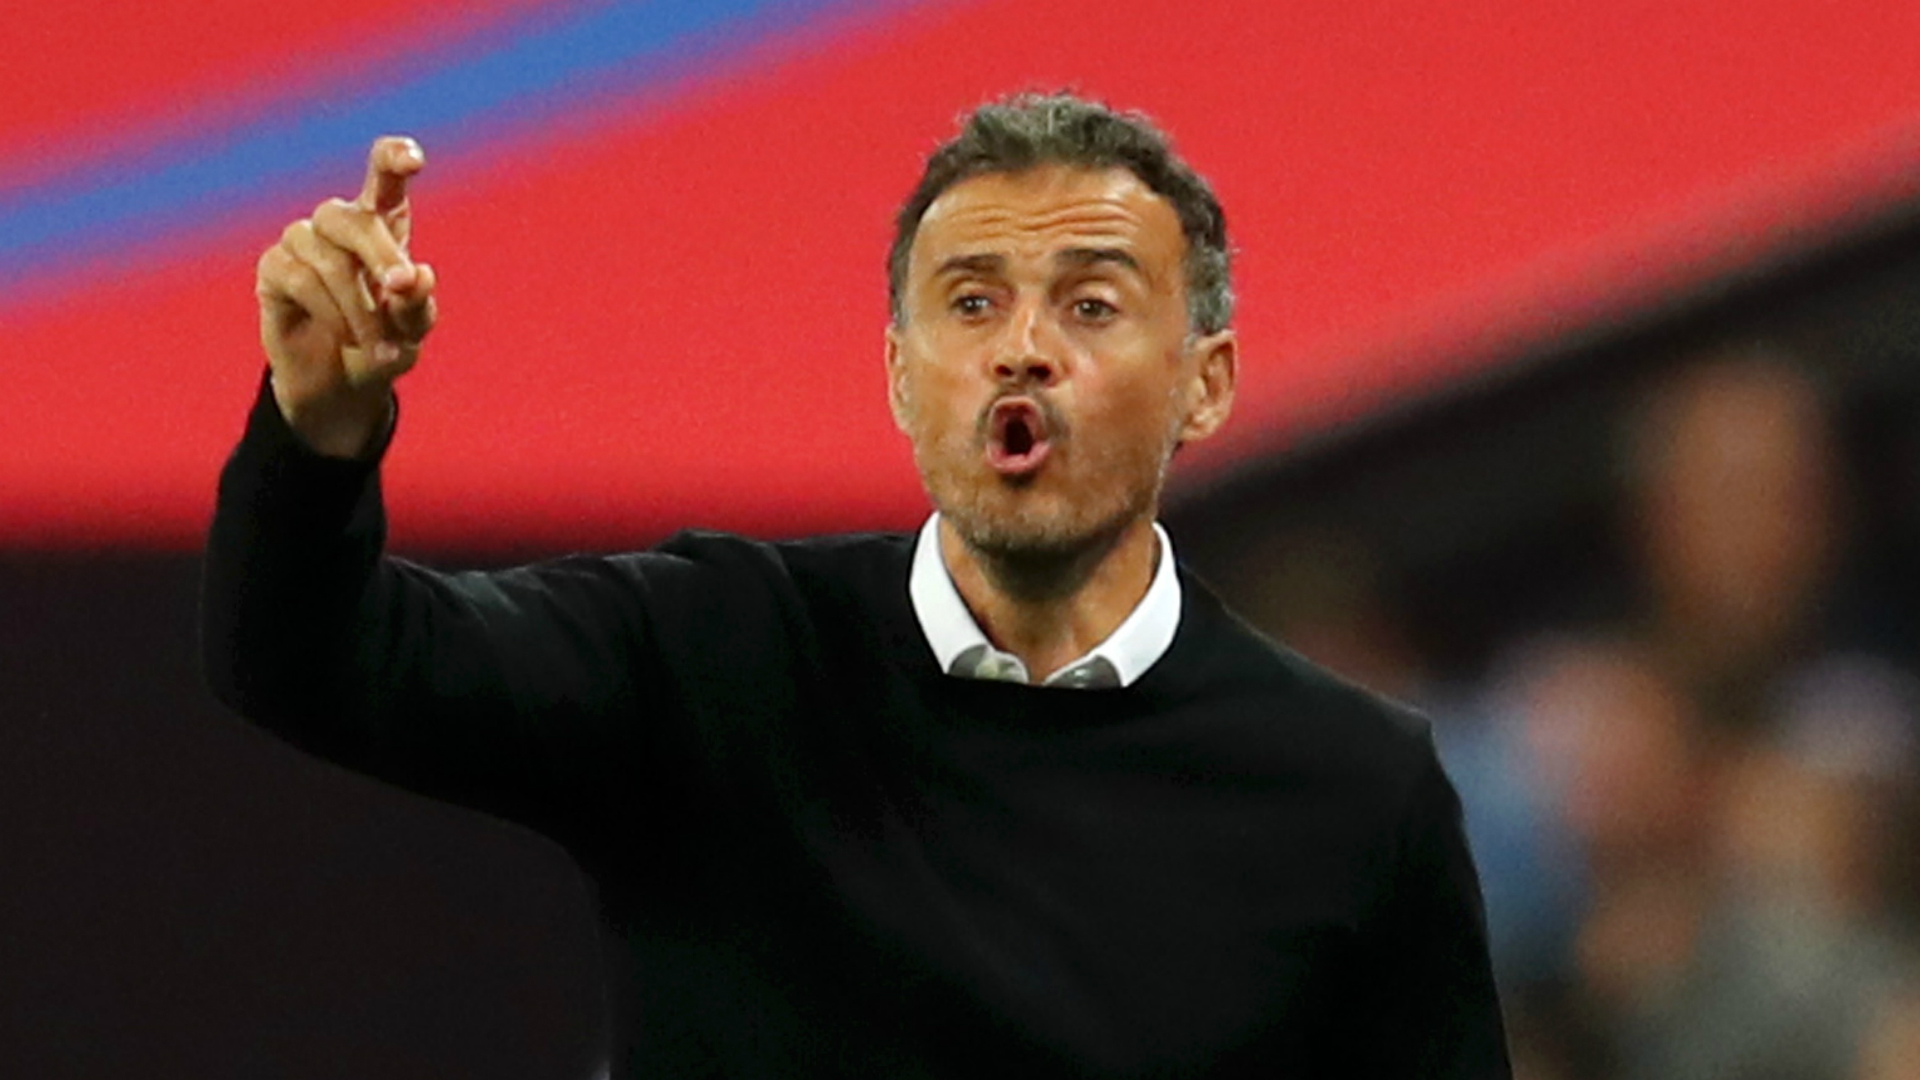 Luis Enrique's return to football is the "best news" of the sudden Spain coaching switch, says Barcelona defender Gerard Pique.